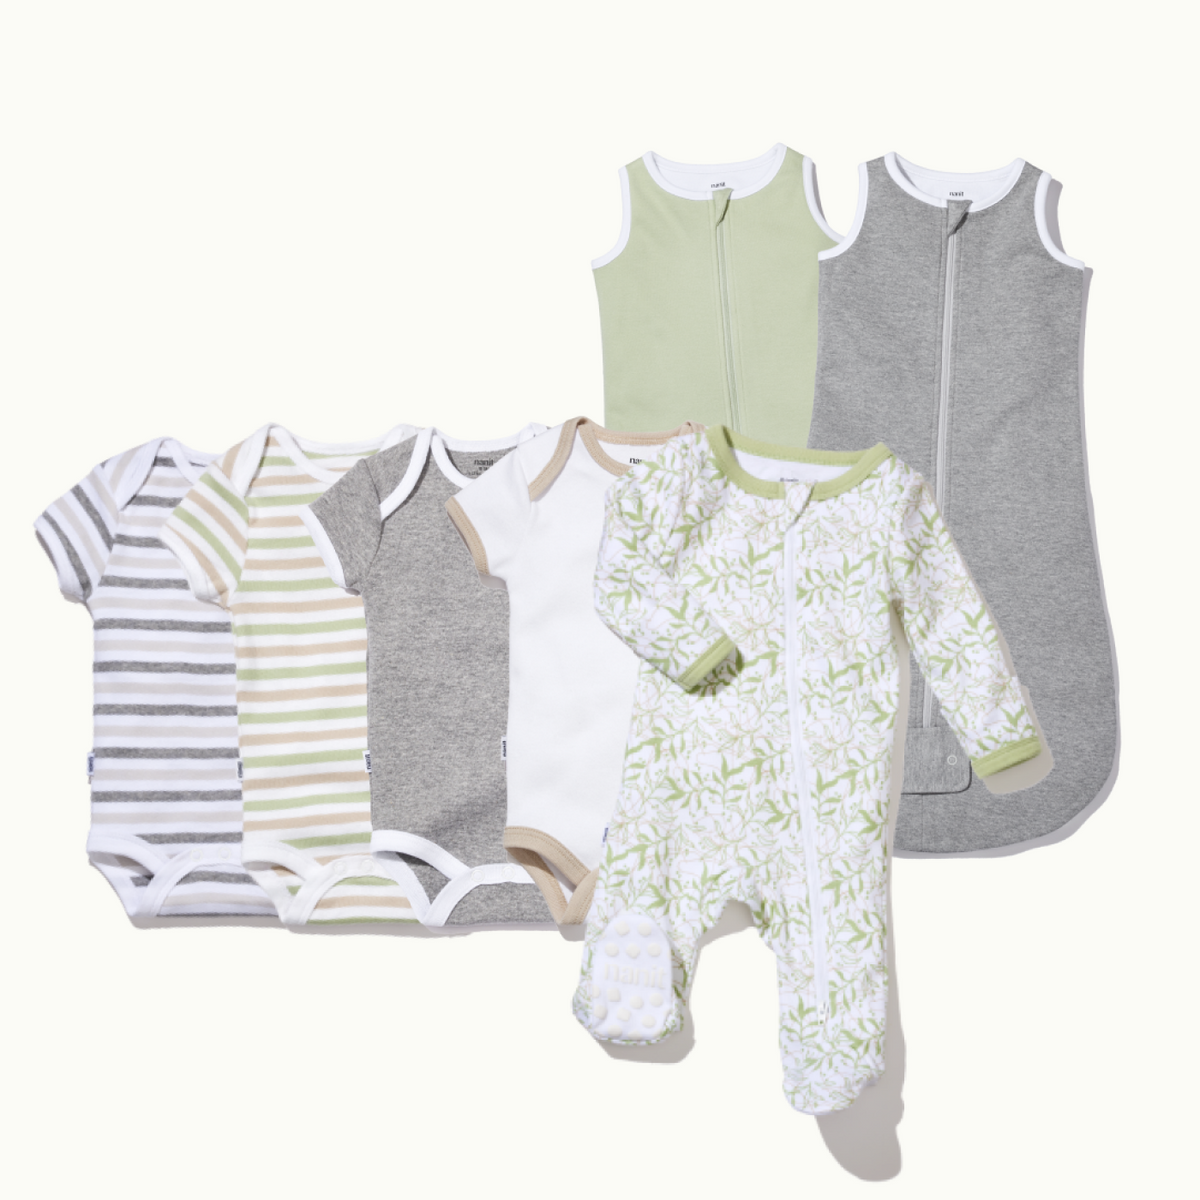 4 bodysuits, 2 sleeping bags, & 1 PJ in white, pistachio stripe, heather gray stripe, heather gray, pistachio & leafy canopy #color_neutral